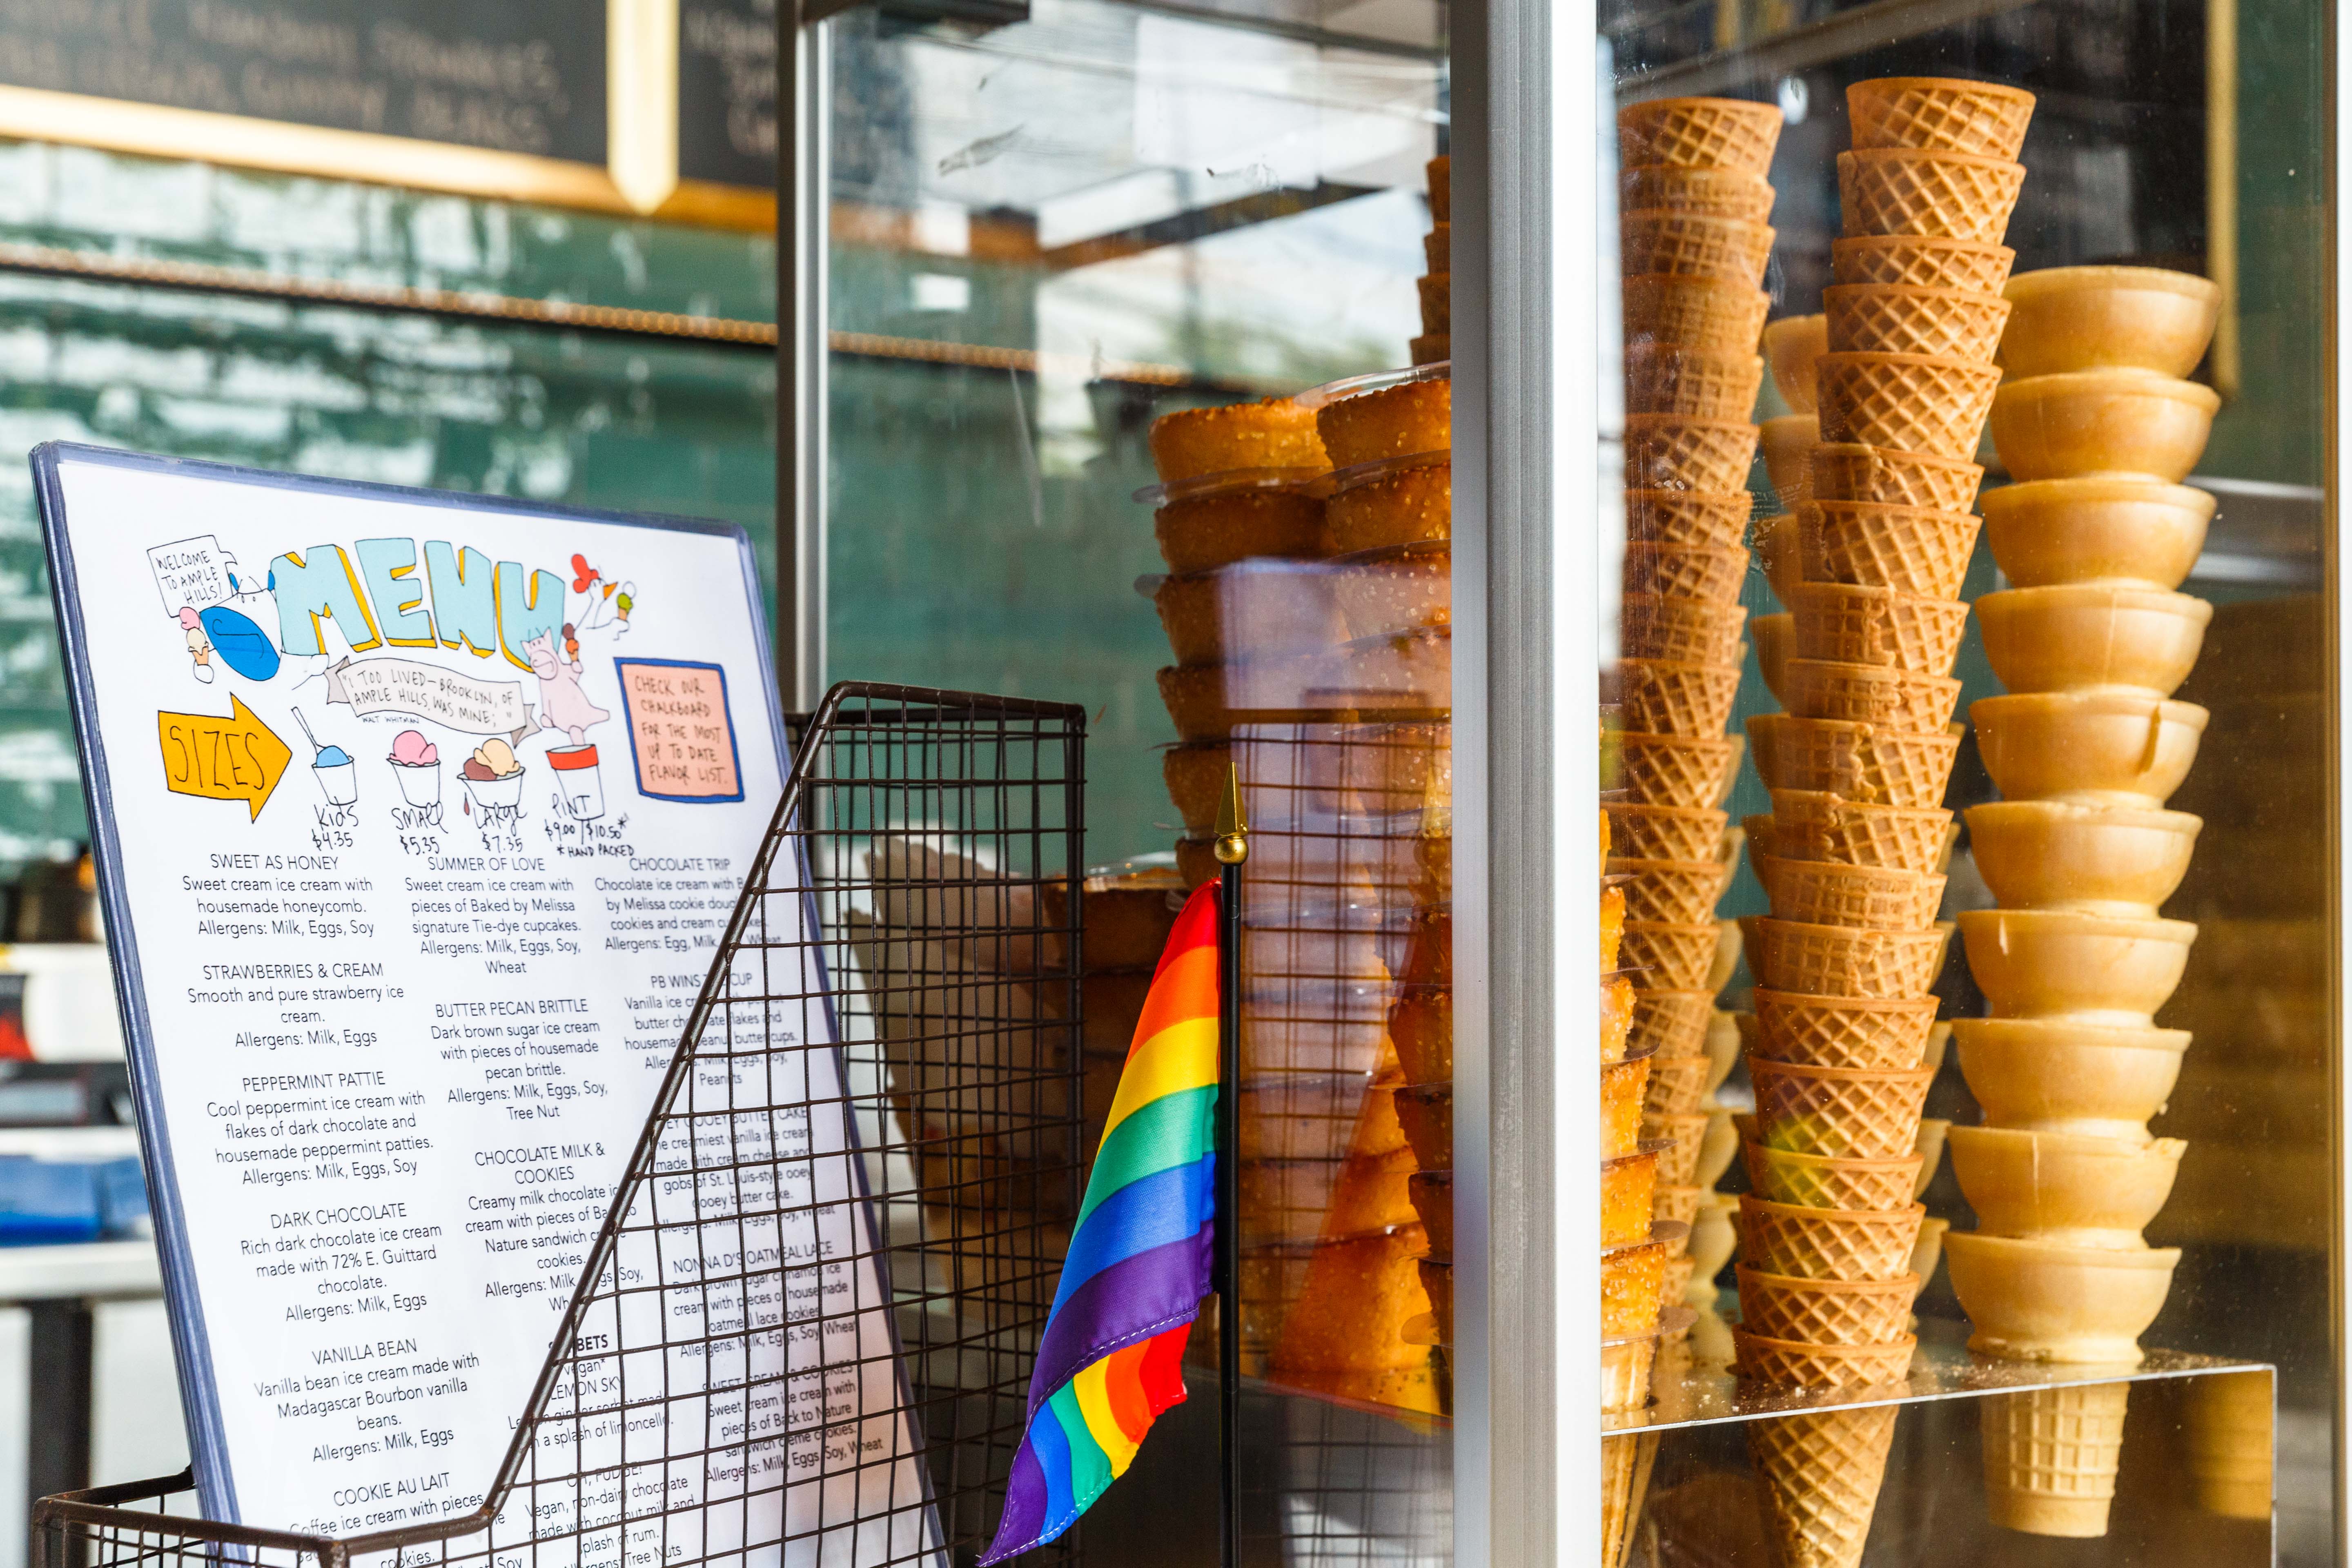 A menu of ice cream flavors next to a stack of ice cream cones inside one of Ample Hills’s shops in Brooklyn